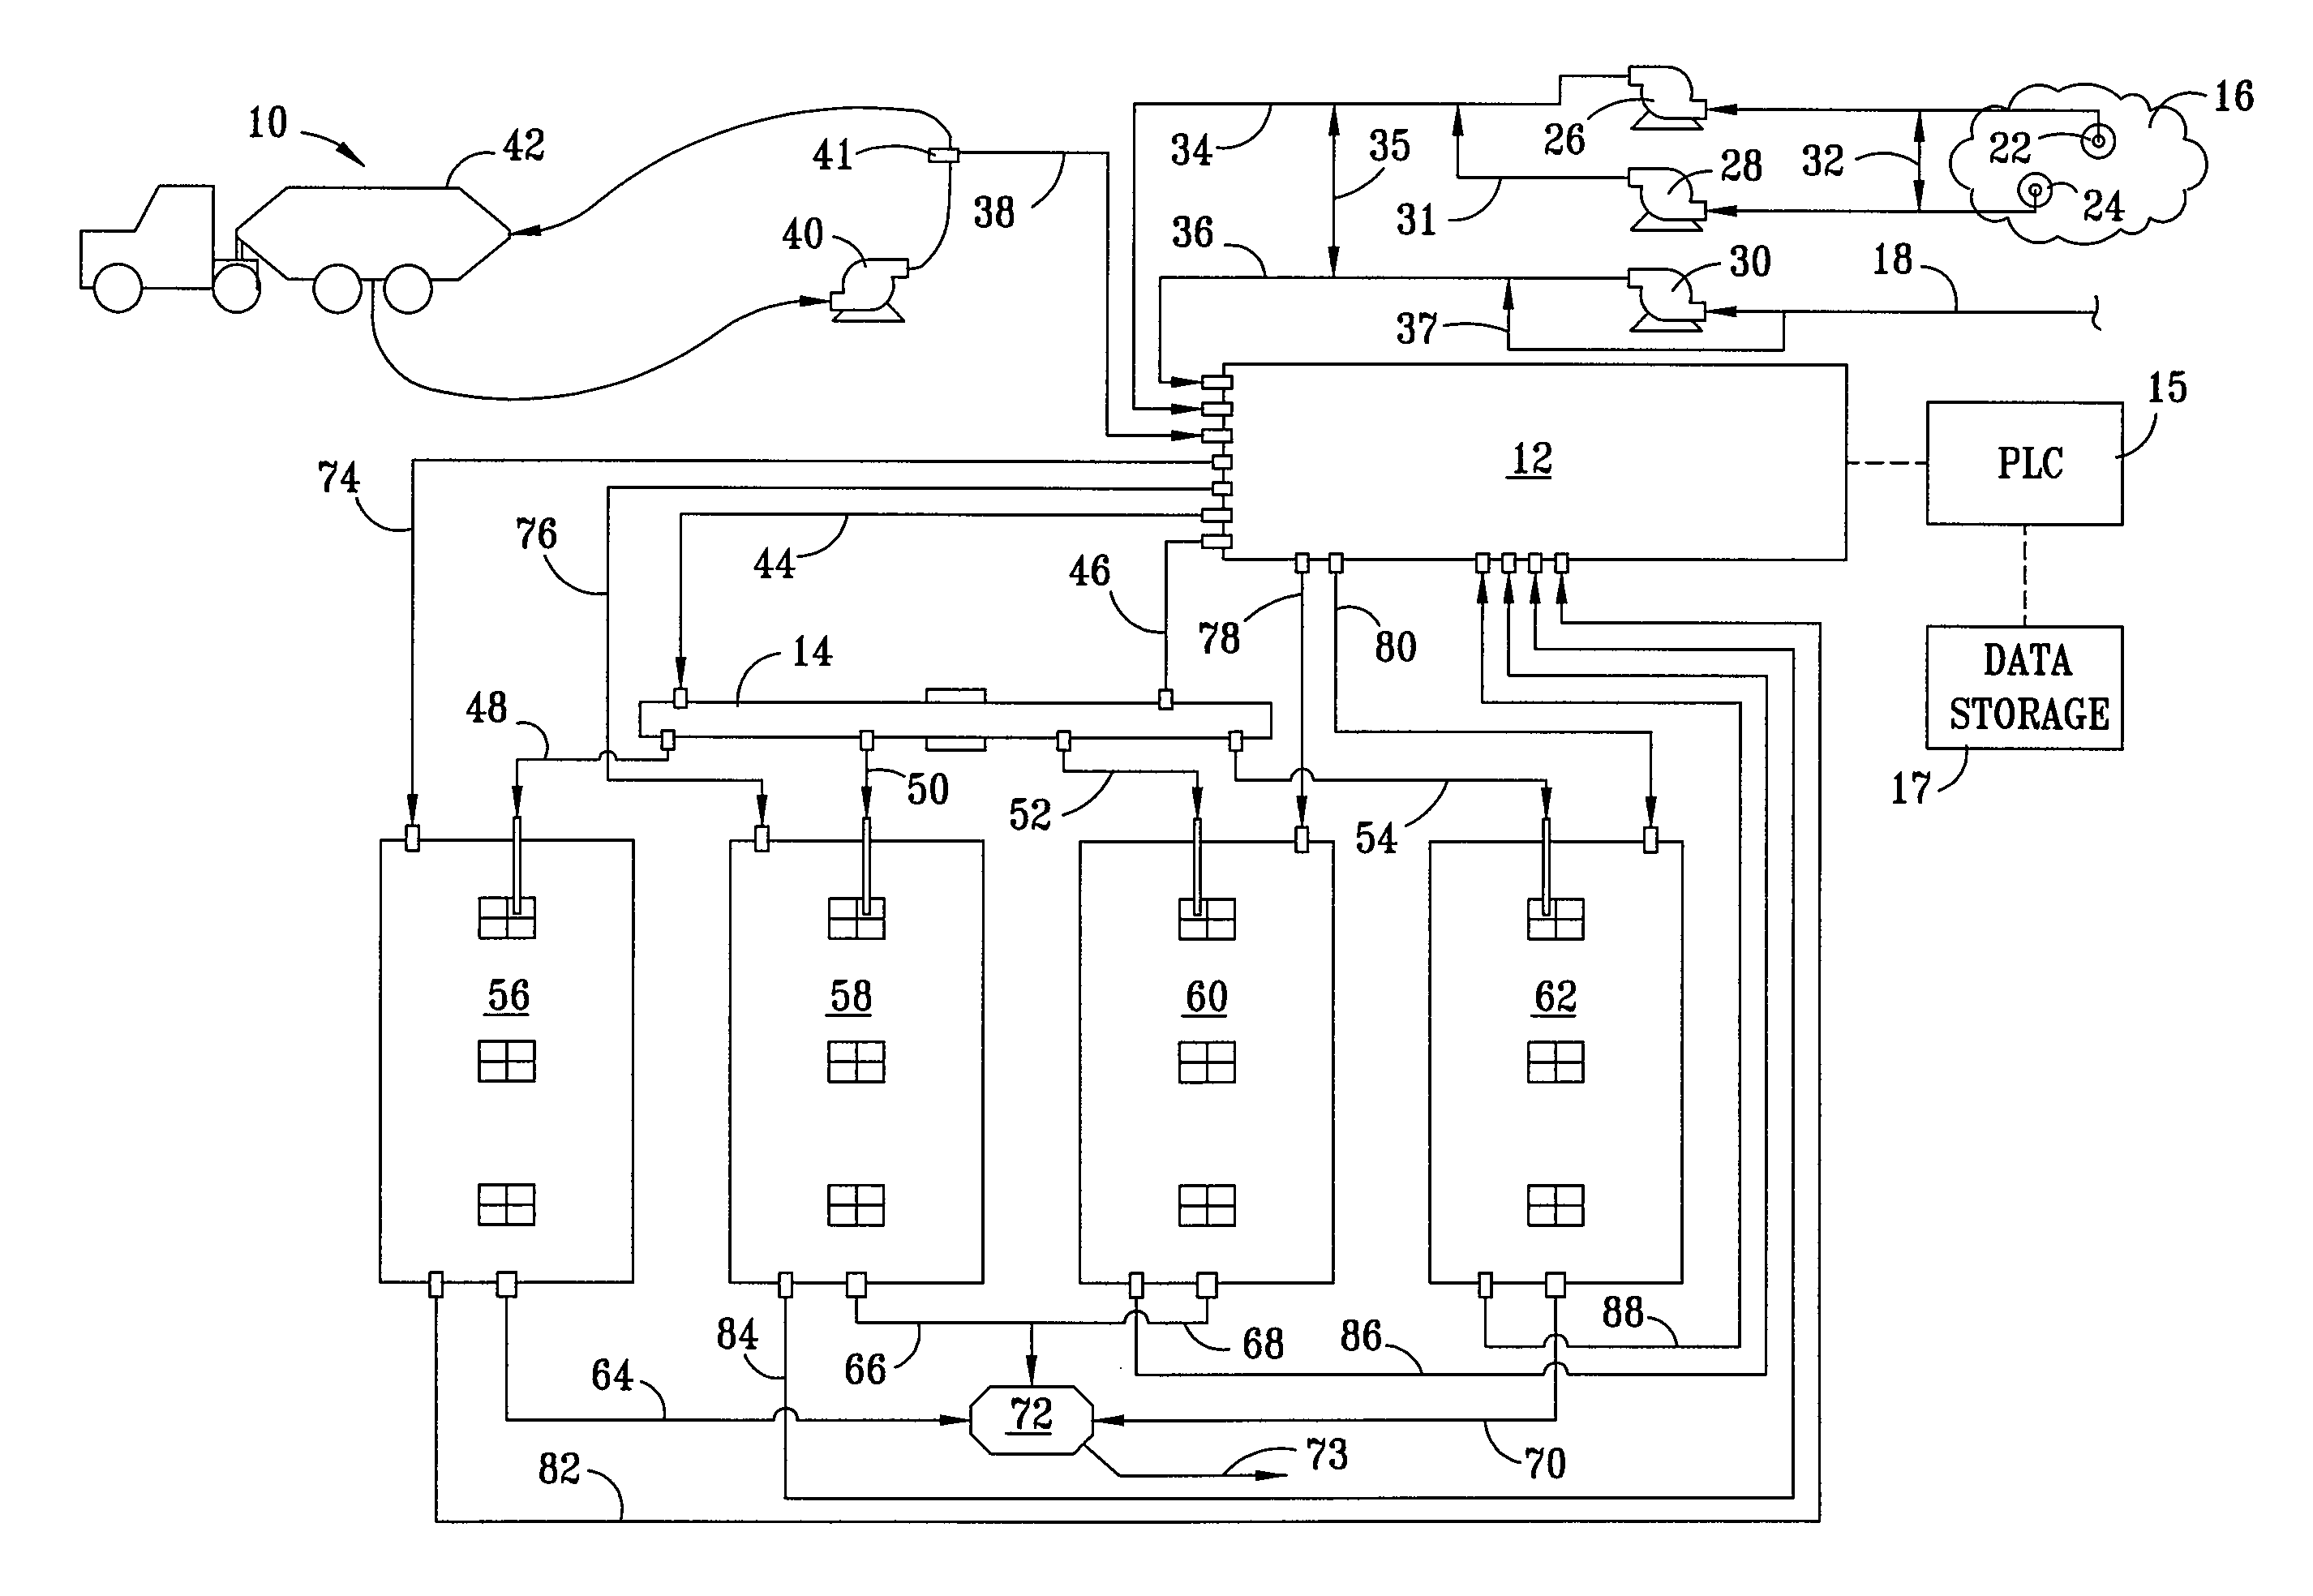 Portable water treatment system and apparatus